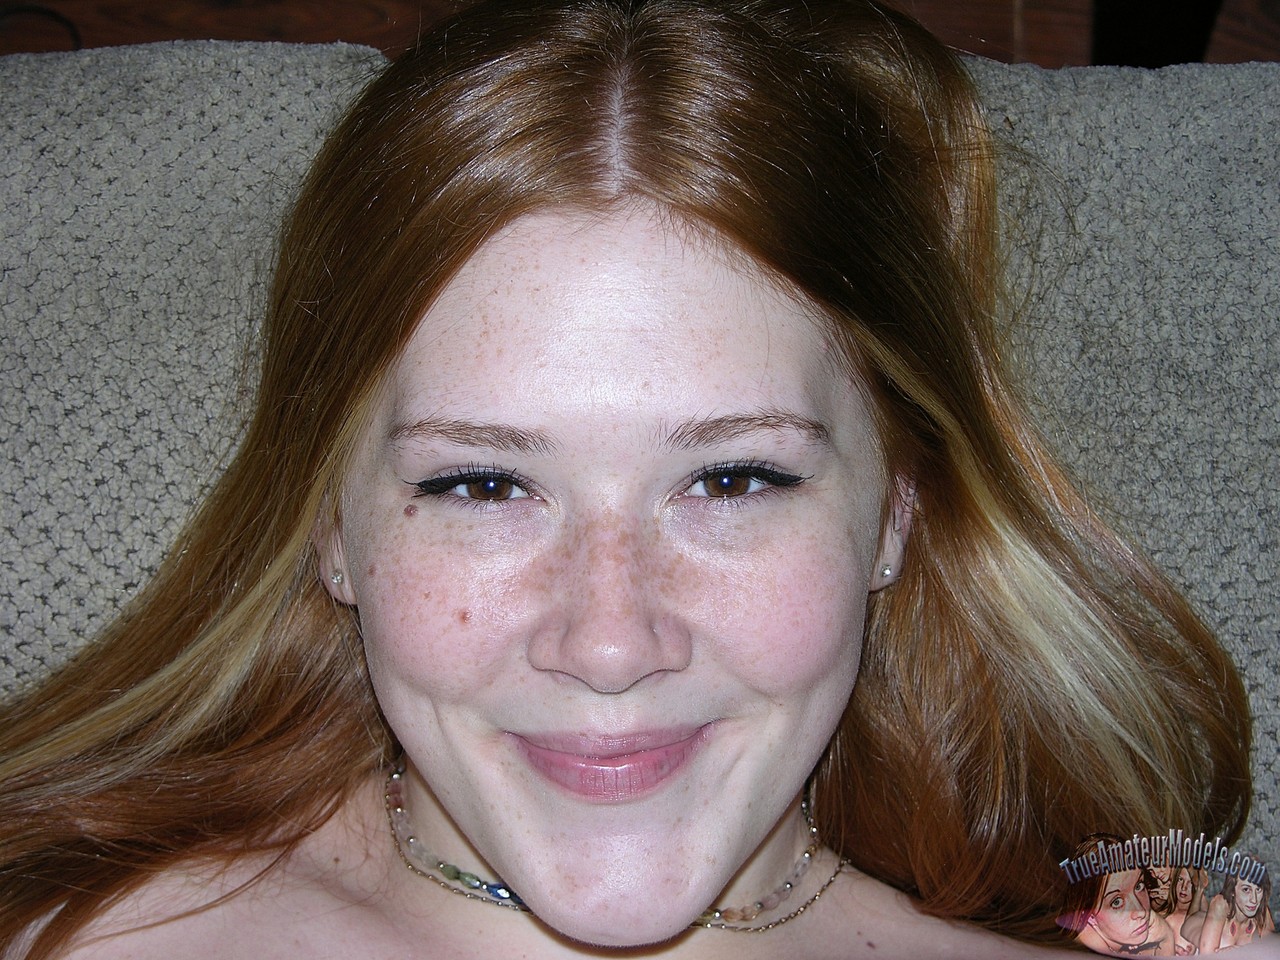 Freckled Face Redhead Amateur Teen Pulling Down Shorts To Expose Butthole foto porno #422855440 | True Amateur Models Pics, Harper R, Face, porno ponsel